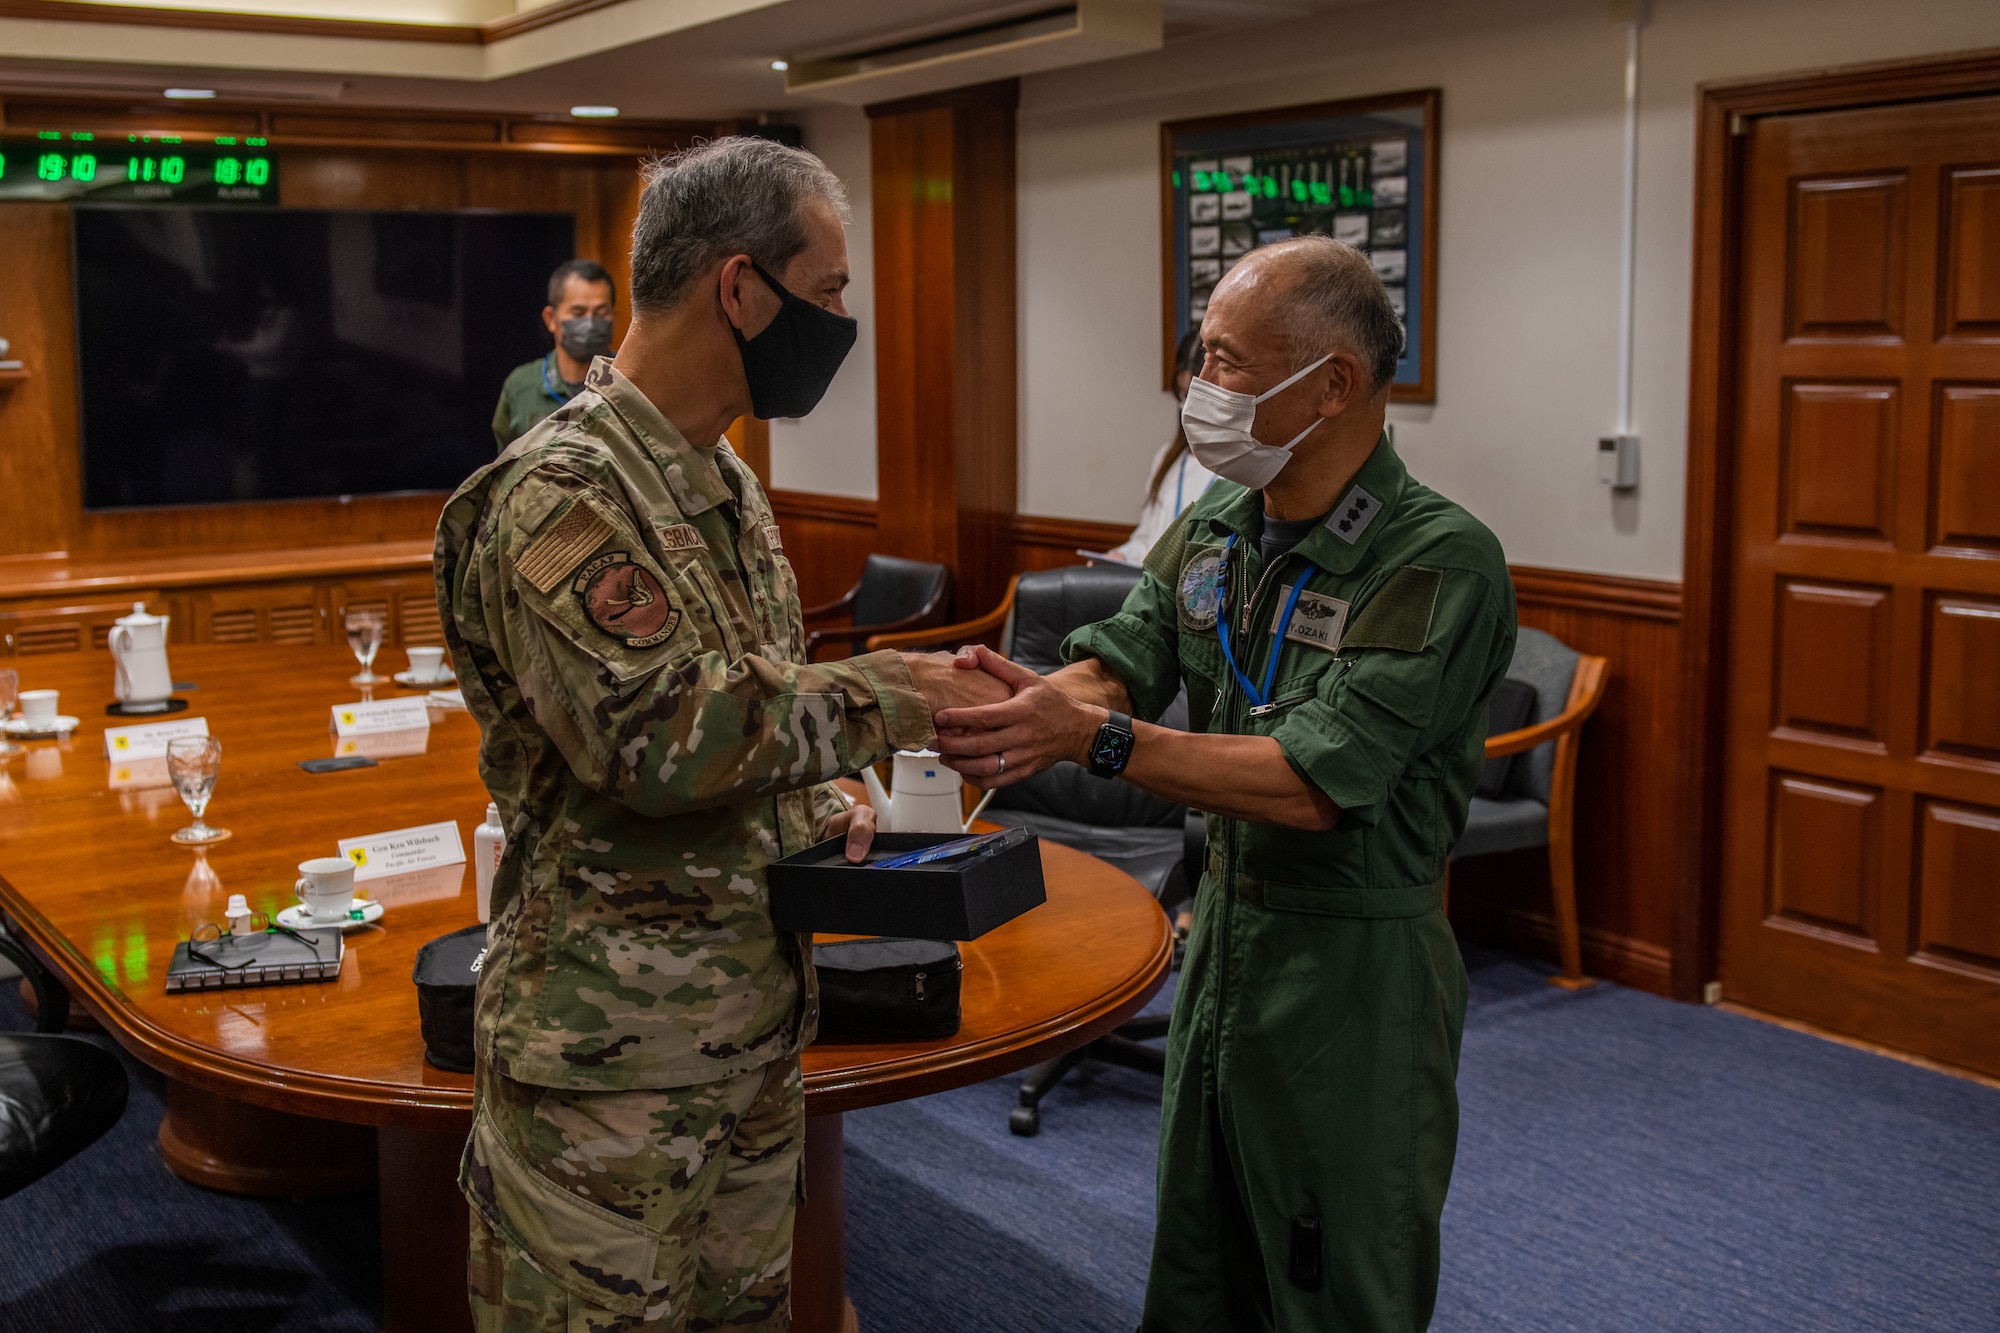 A U.S. Air Force General shakes hands with a Japanese Lieutenant General in a meeting room